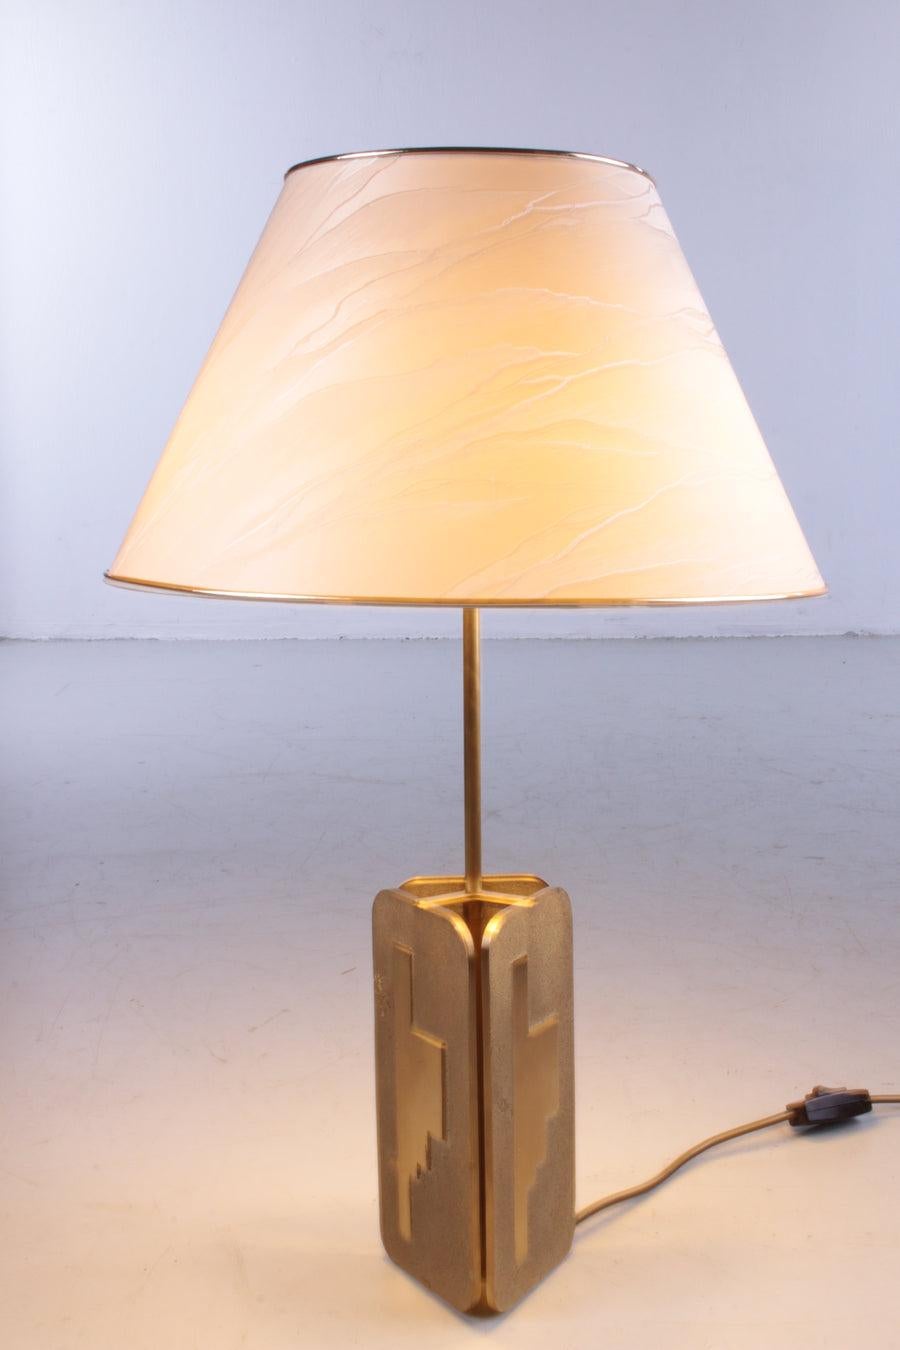 Hollywood Regency Brass Table Lamp With Shade, 1970s

Additional information:
Dimensions: 41 W x 41 D x 65 H cm
Period of Time: 1970
Country of origin: Germany
Condition: Good